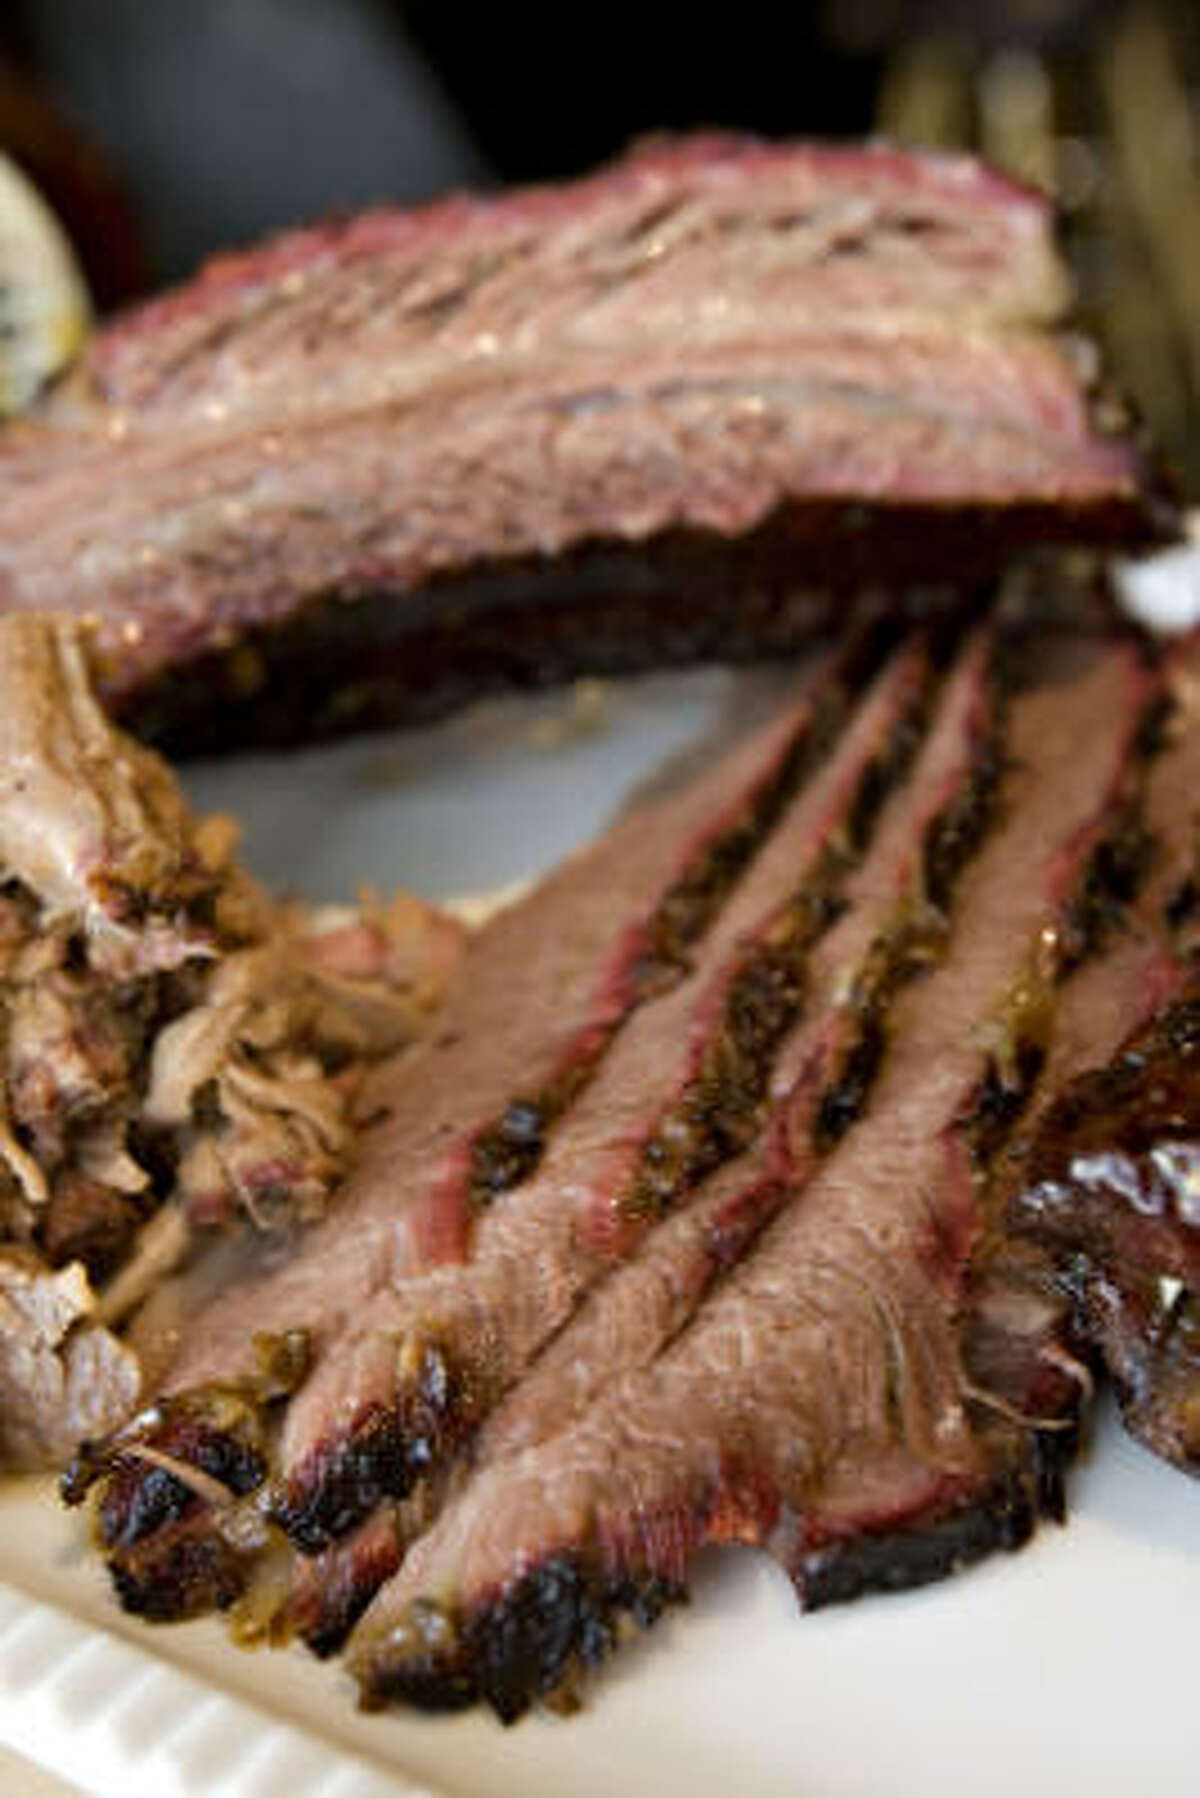 The key to a perfect beef brisket is to cook it low and slow.